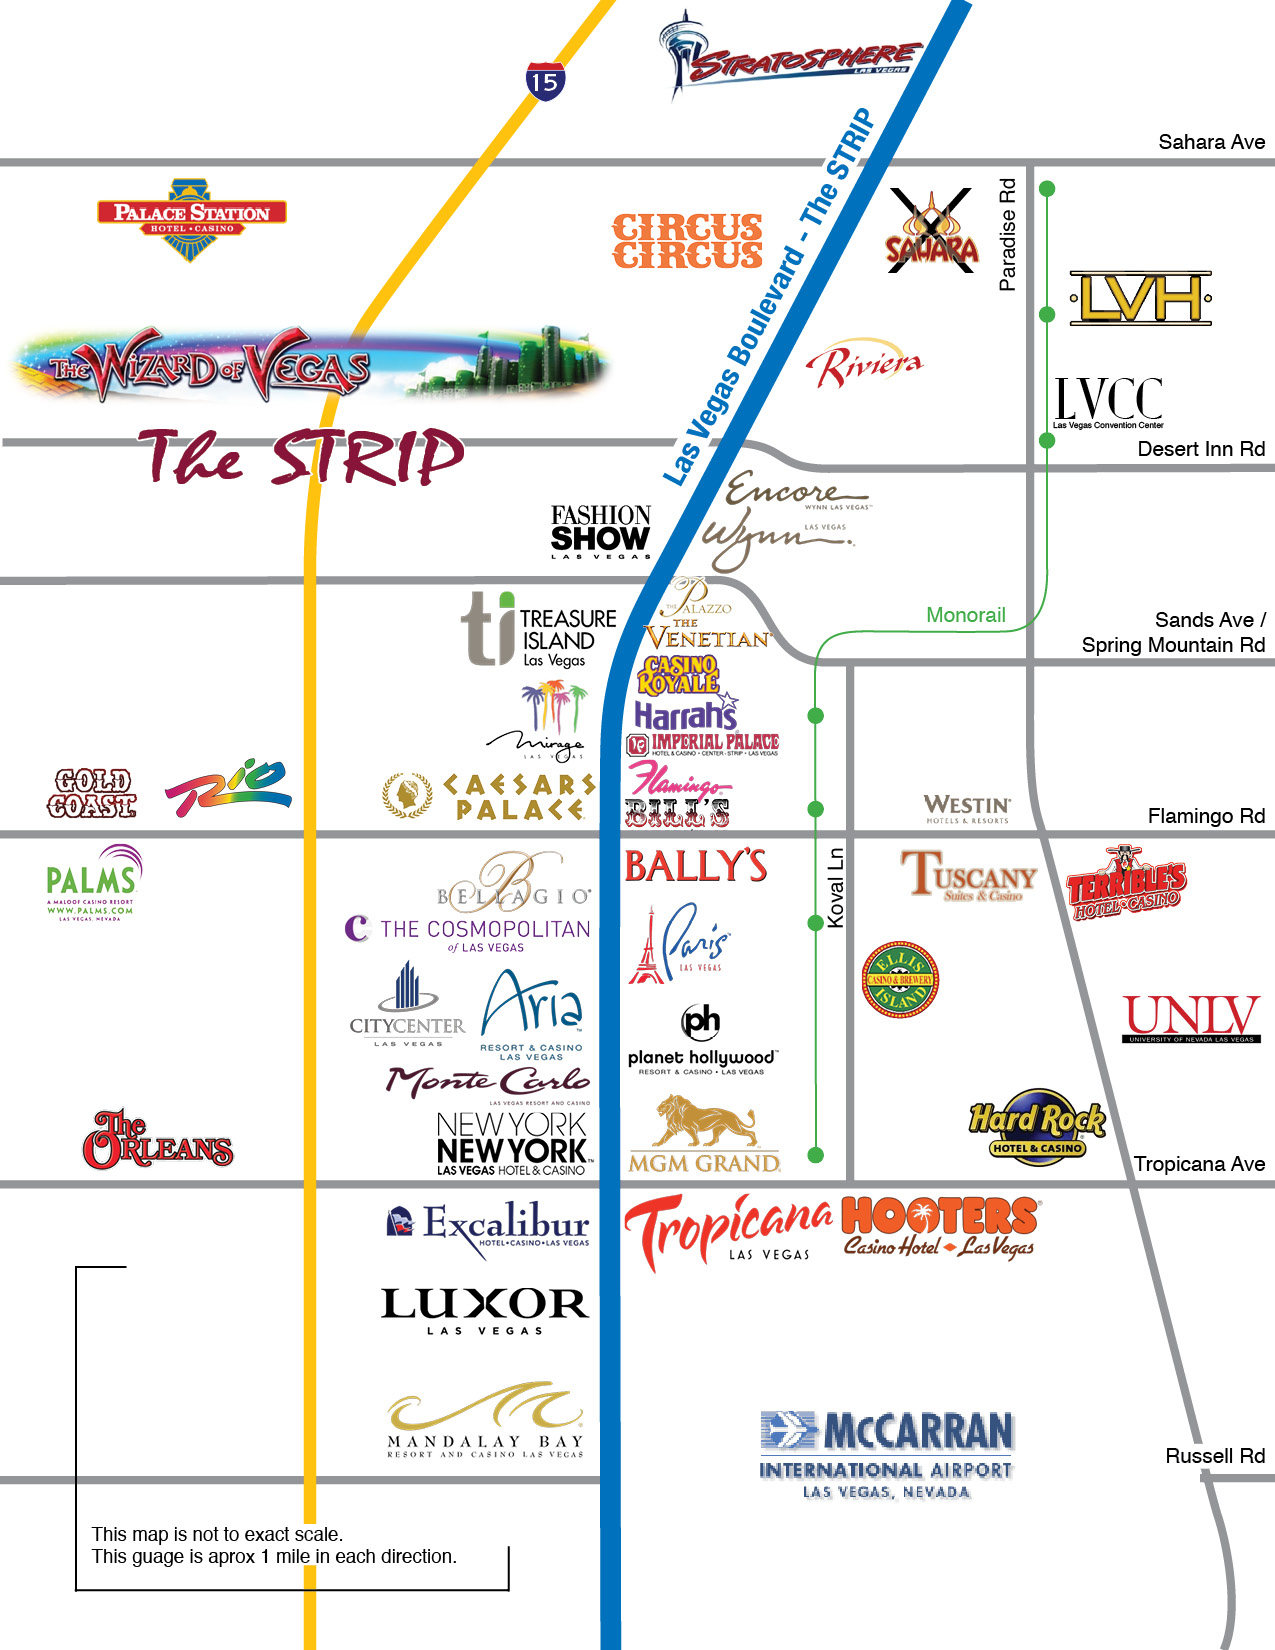 Map Of Las Vegas Strip Showing Hotels And Monorail 2018 World's Best